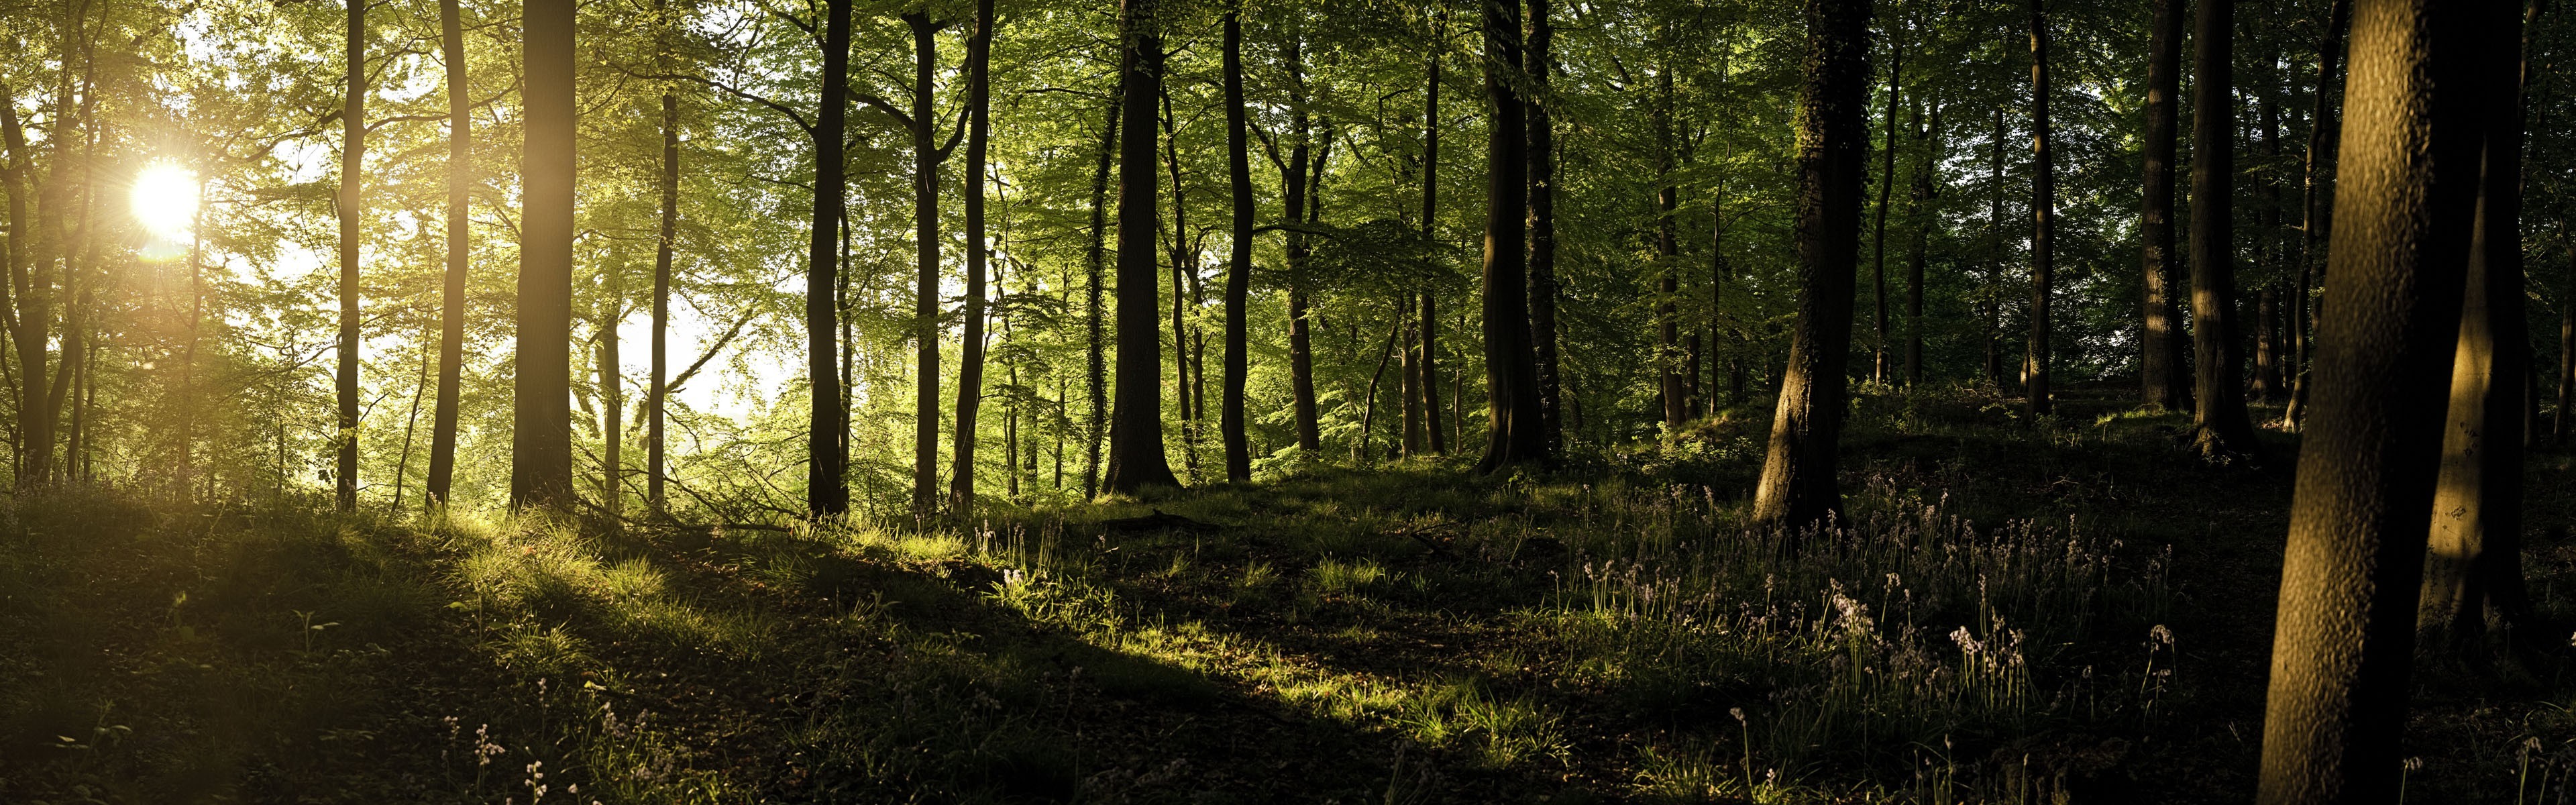 General 3840x1200 forest sunlight trees nature